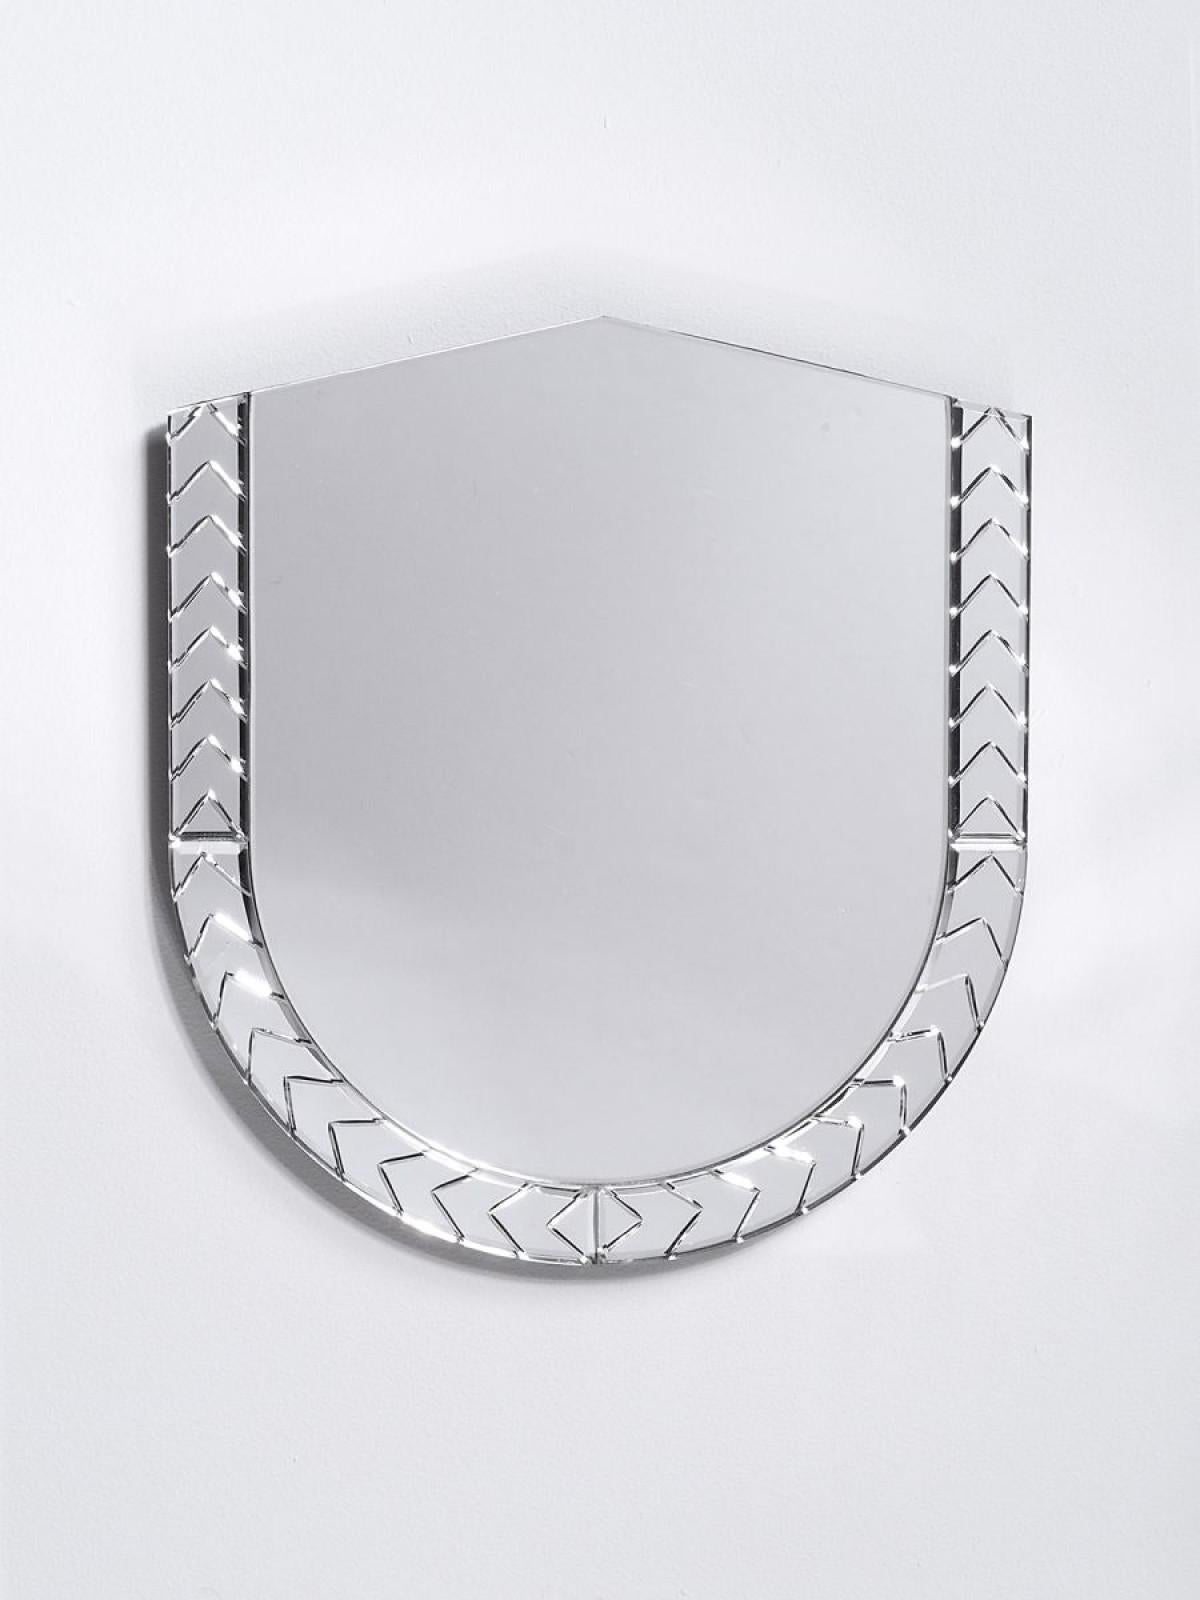 Large Scena Elemento Due Murano mirror by Nikolai Kotlarczyk
Dimensions: D 3 x W 65 x H 60 cm 
Materials: silvered carved glass, dark gray wood back. 
Also available in other designs and dimensions.


Elemento is a series of solid glass